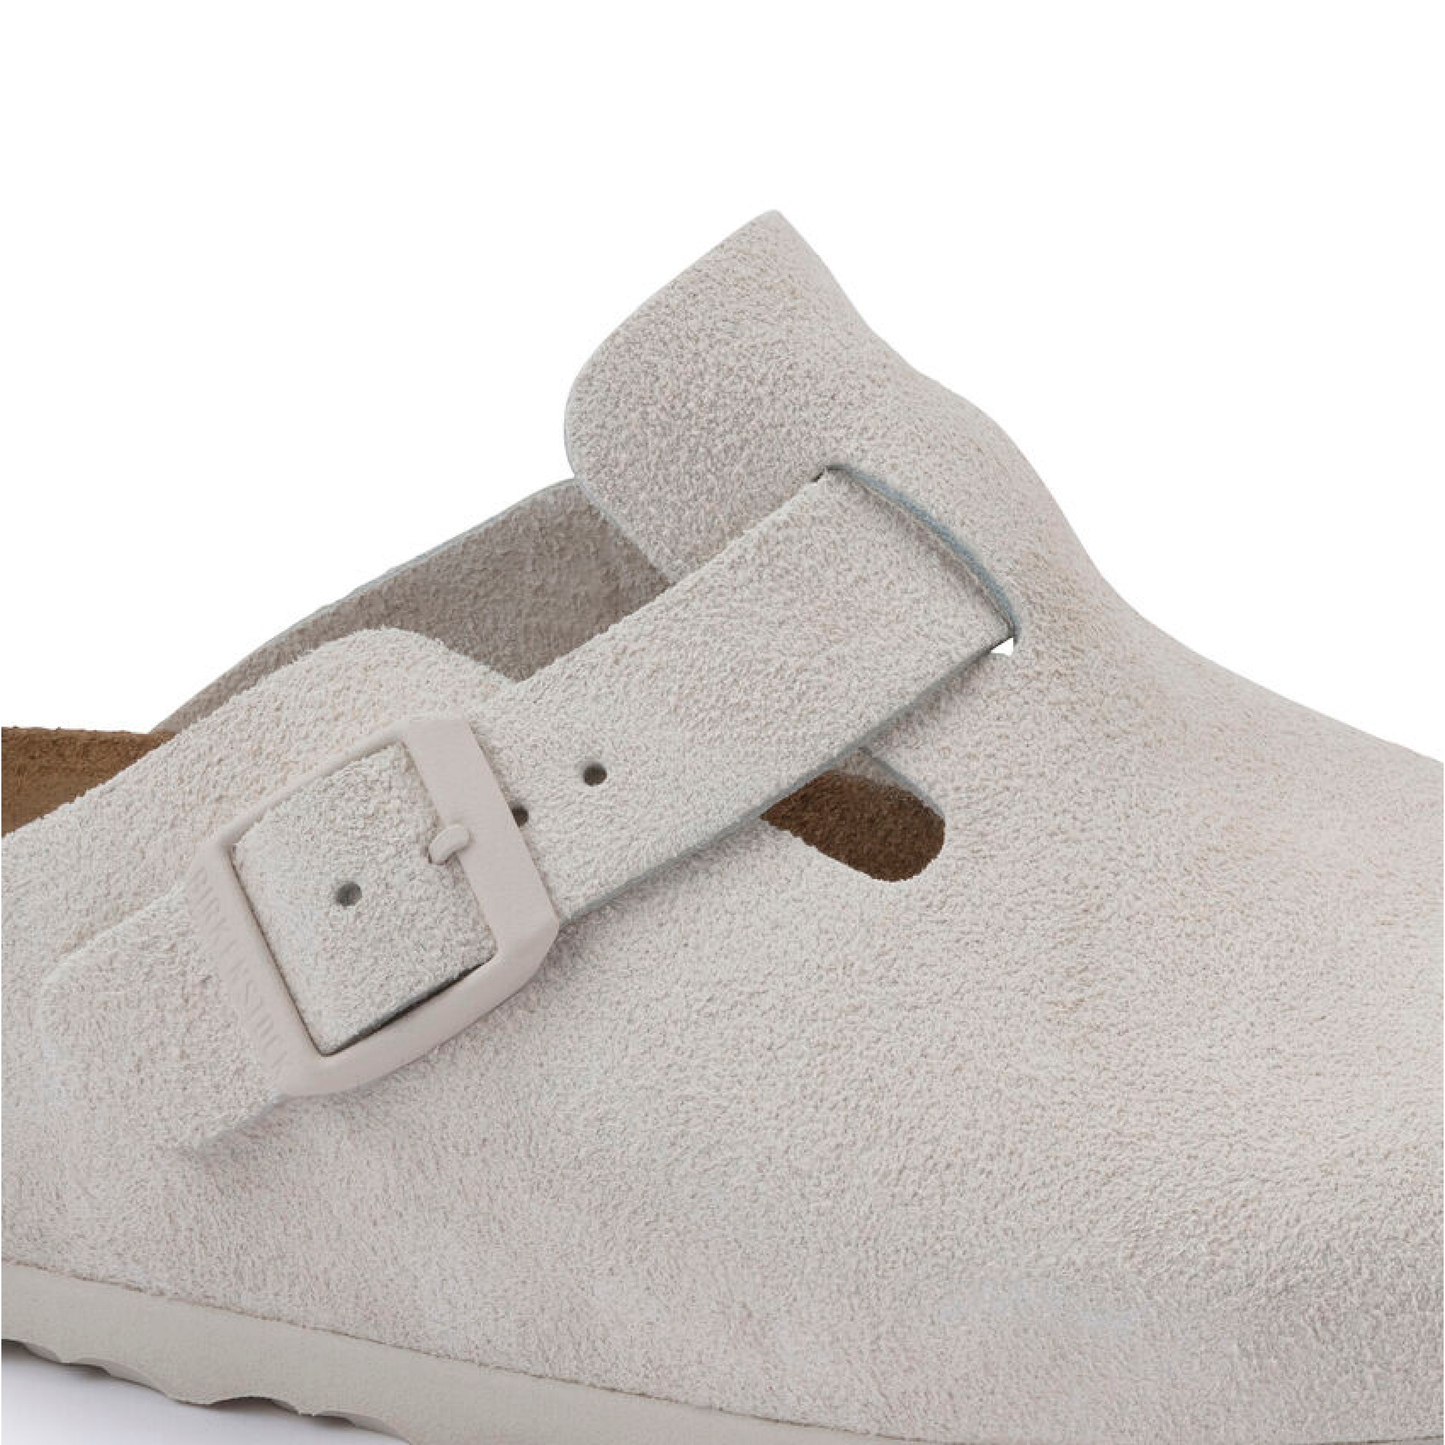 Boston Suede Slippers, Antique White